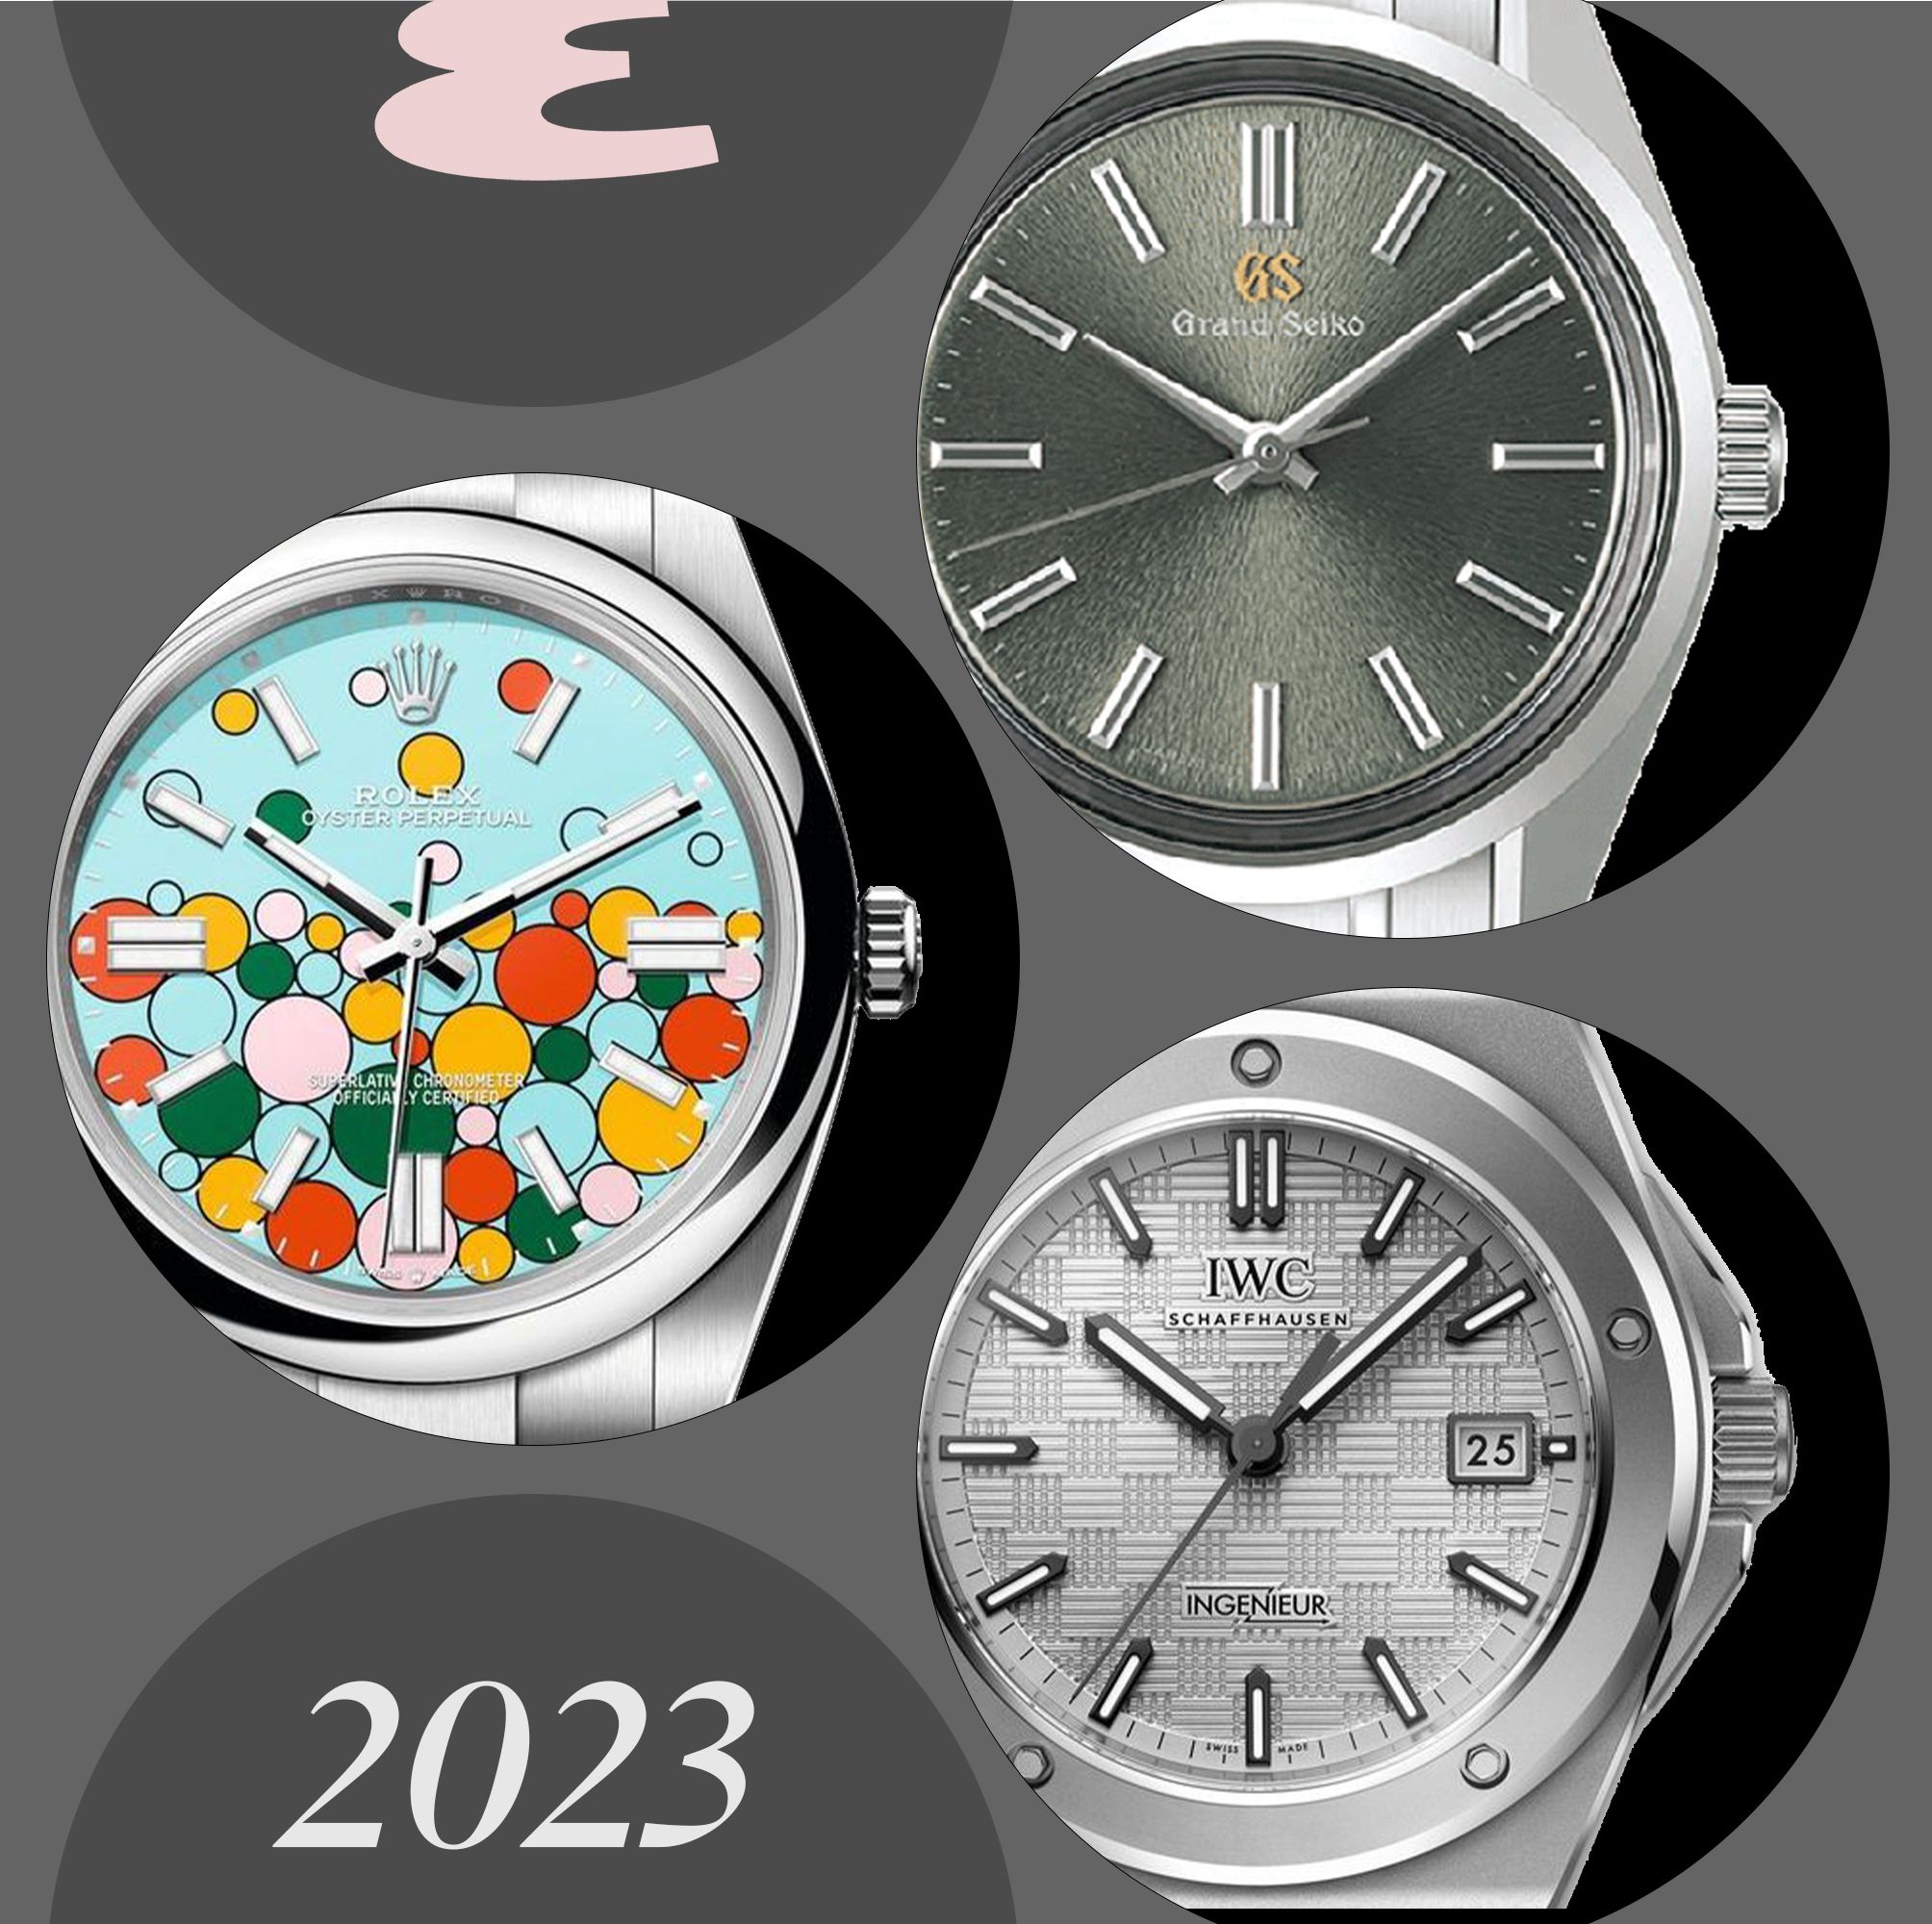 The 15 Best Watches of 2023